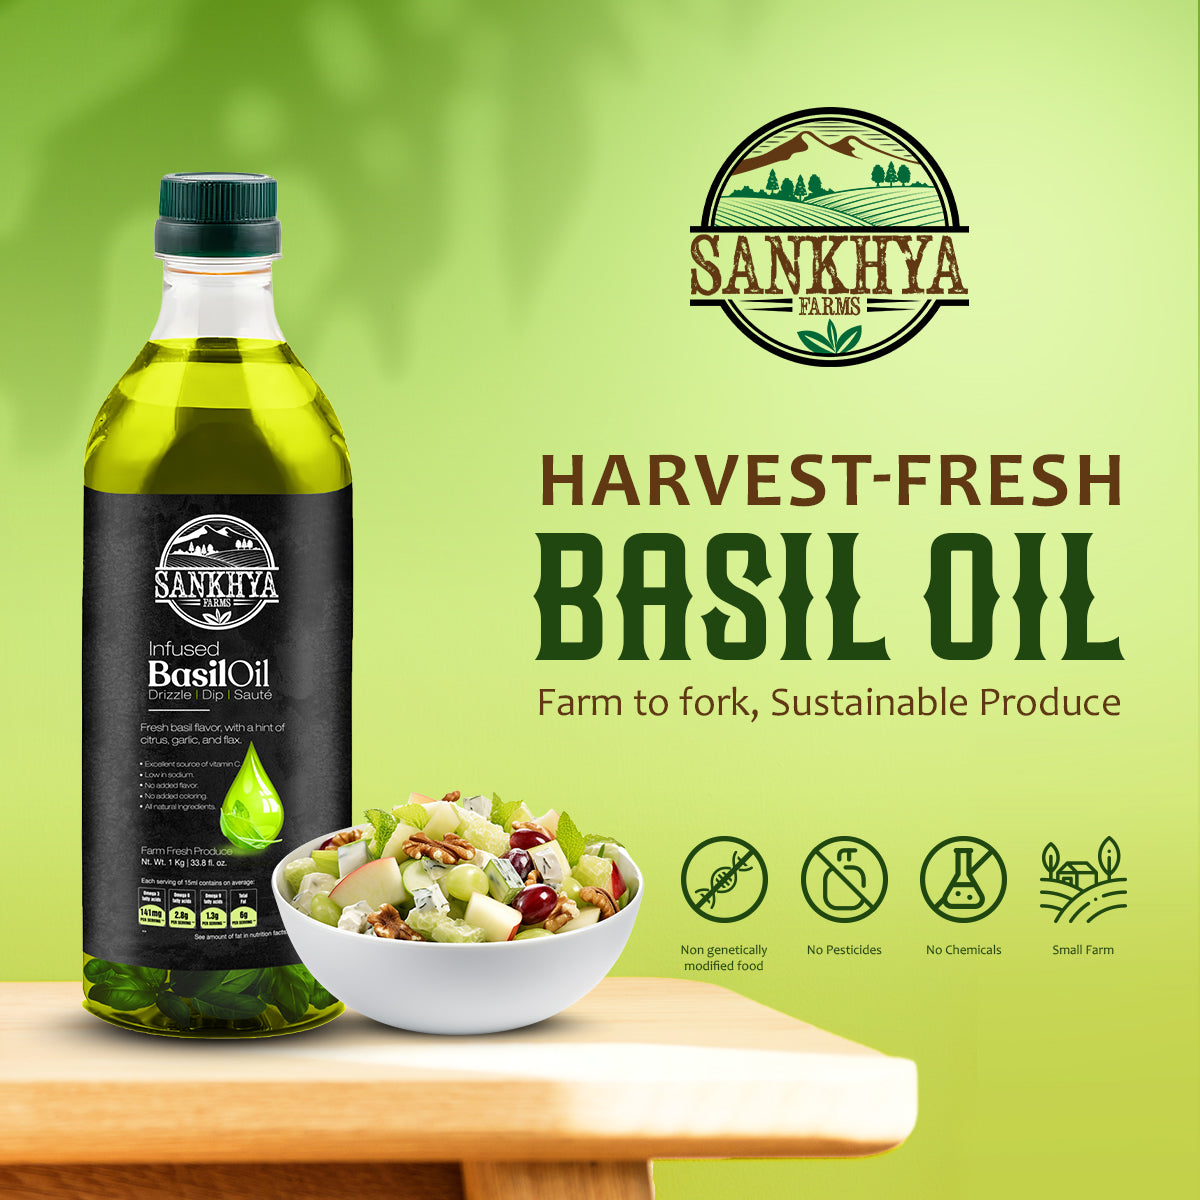 Infused Basil Oil | Finishing Oil | Spread | Sauces | Dips | Curries | Salad Dressing